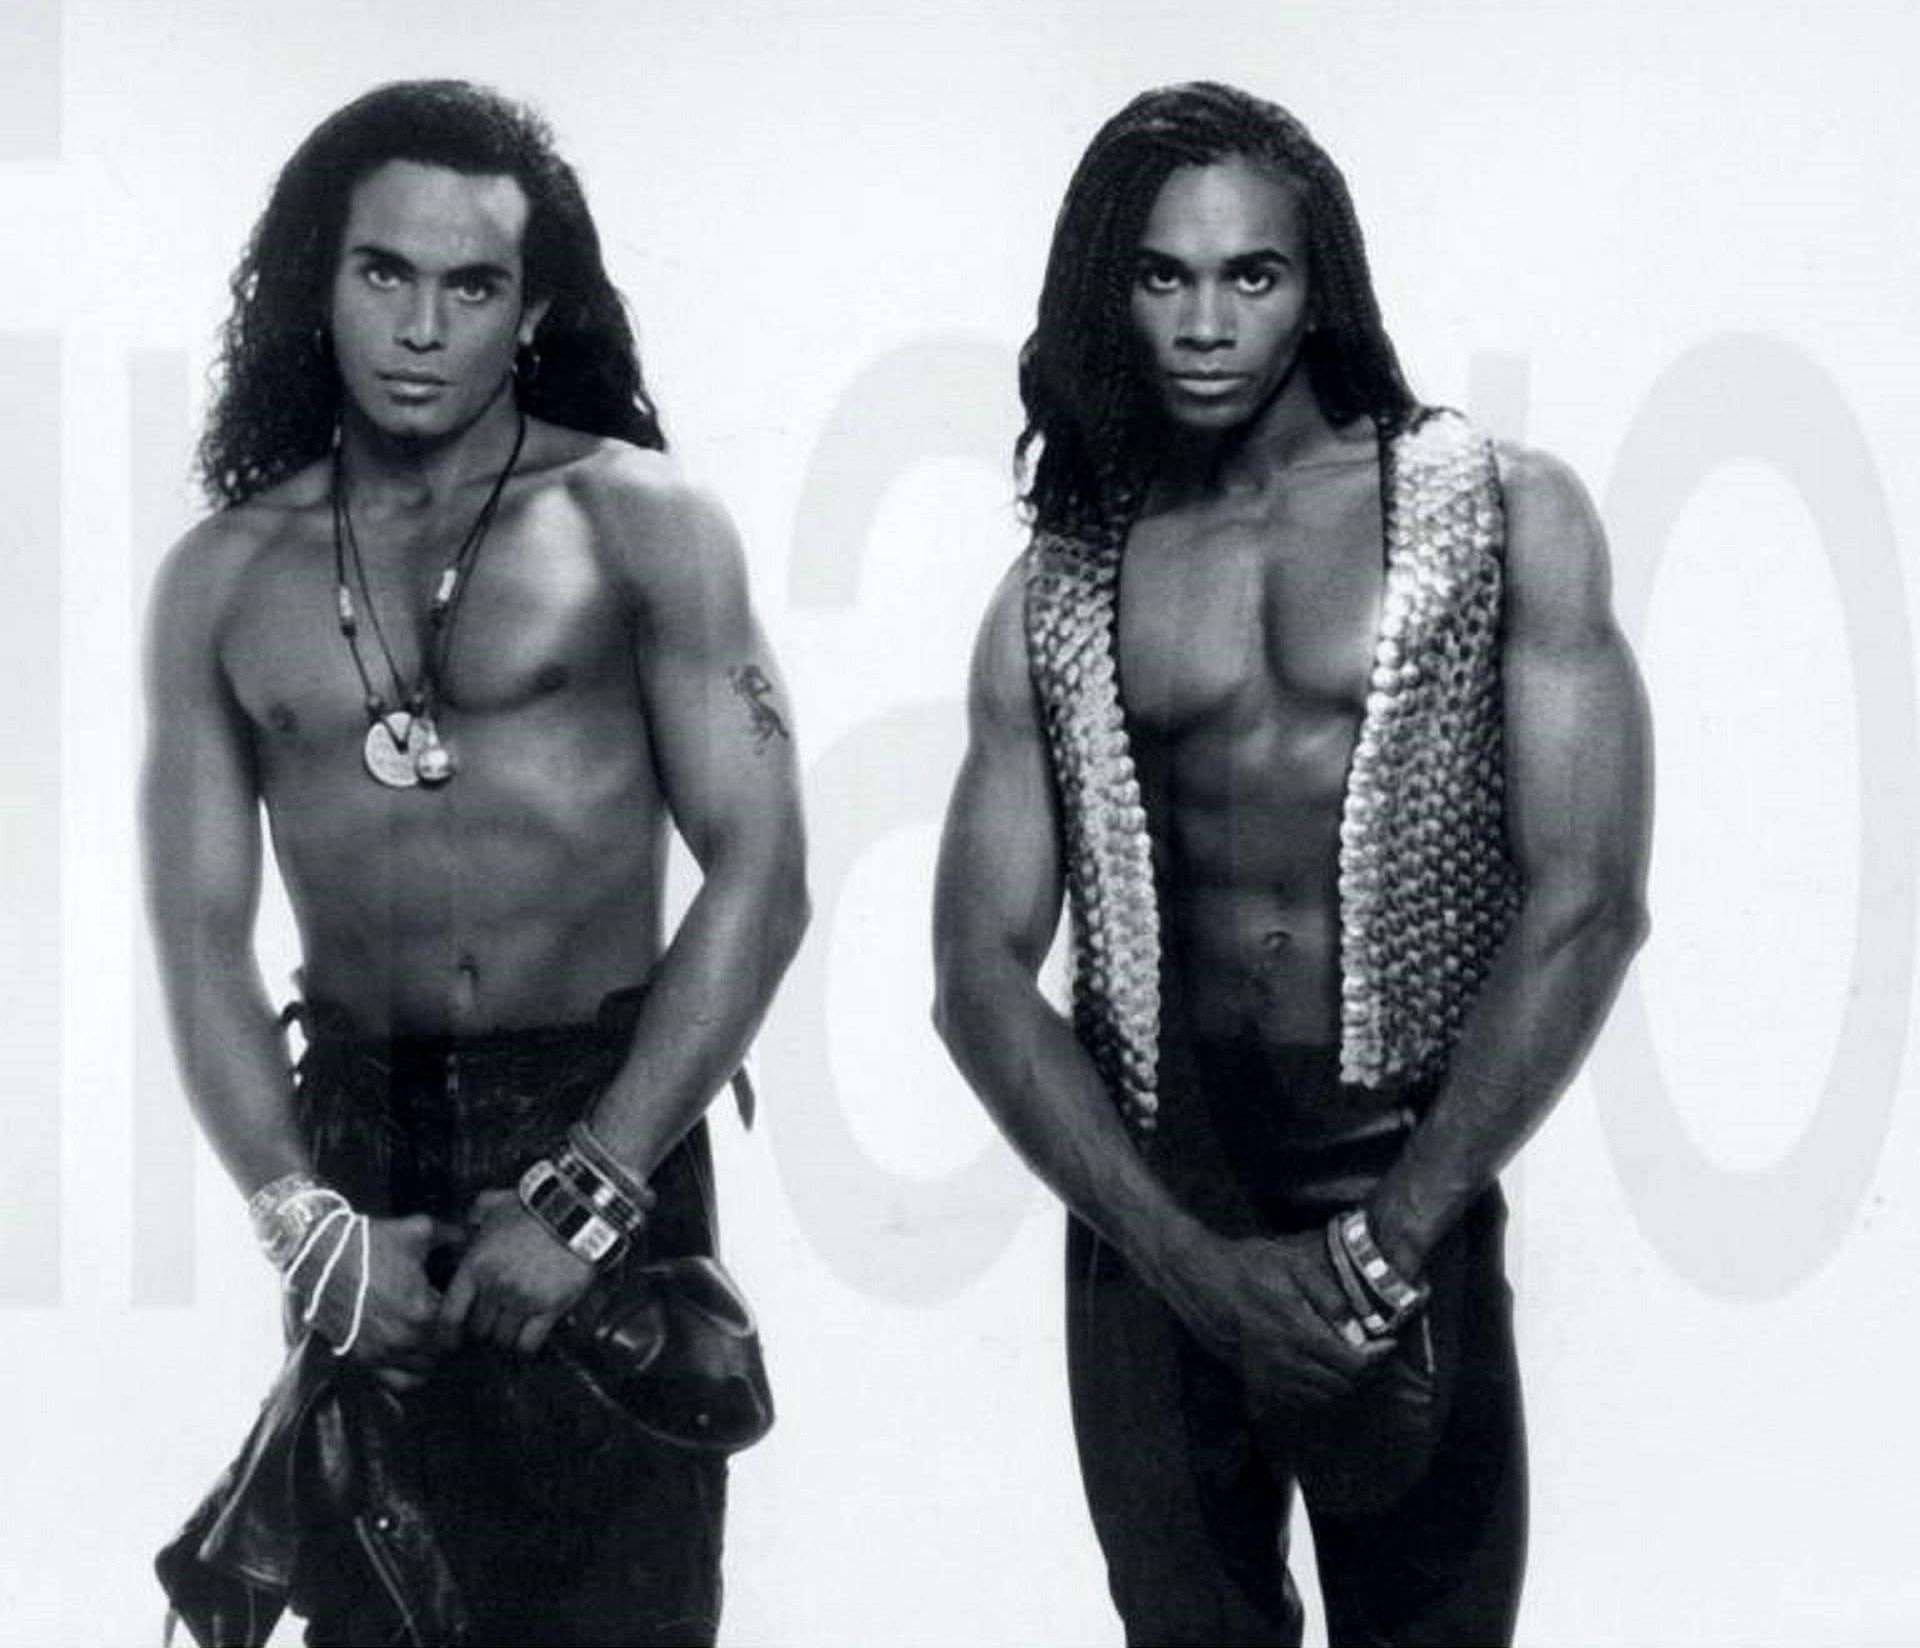 Fab Morvan Claims Unpaid Image Rights in the Wake of Milli Vanilli Documentary